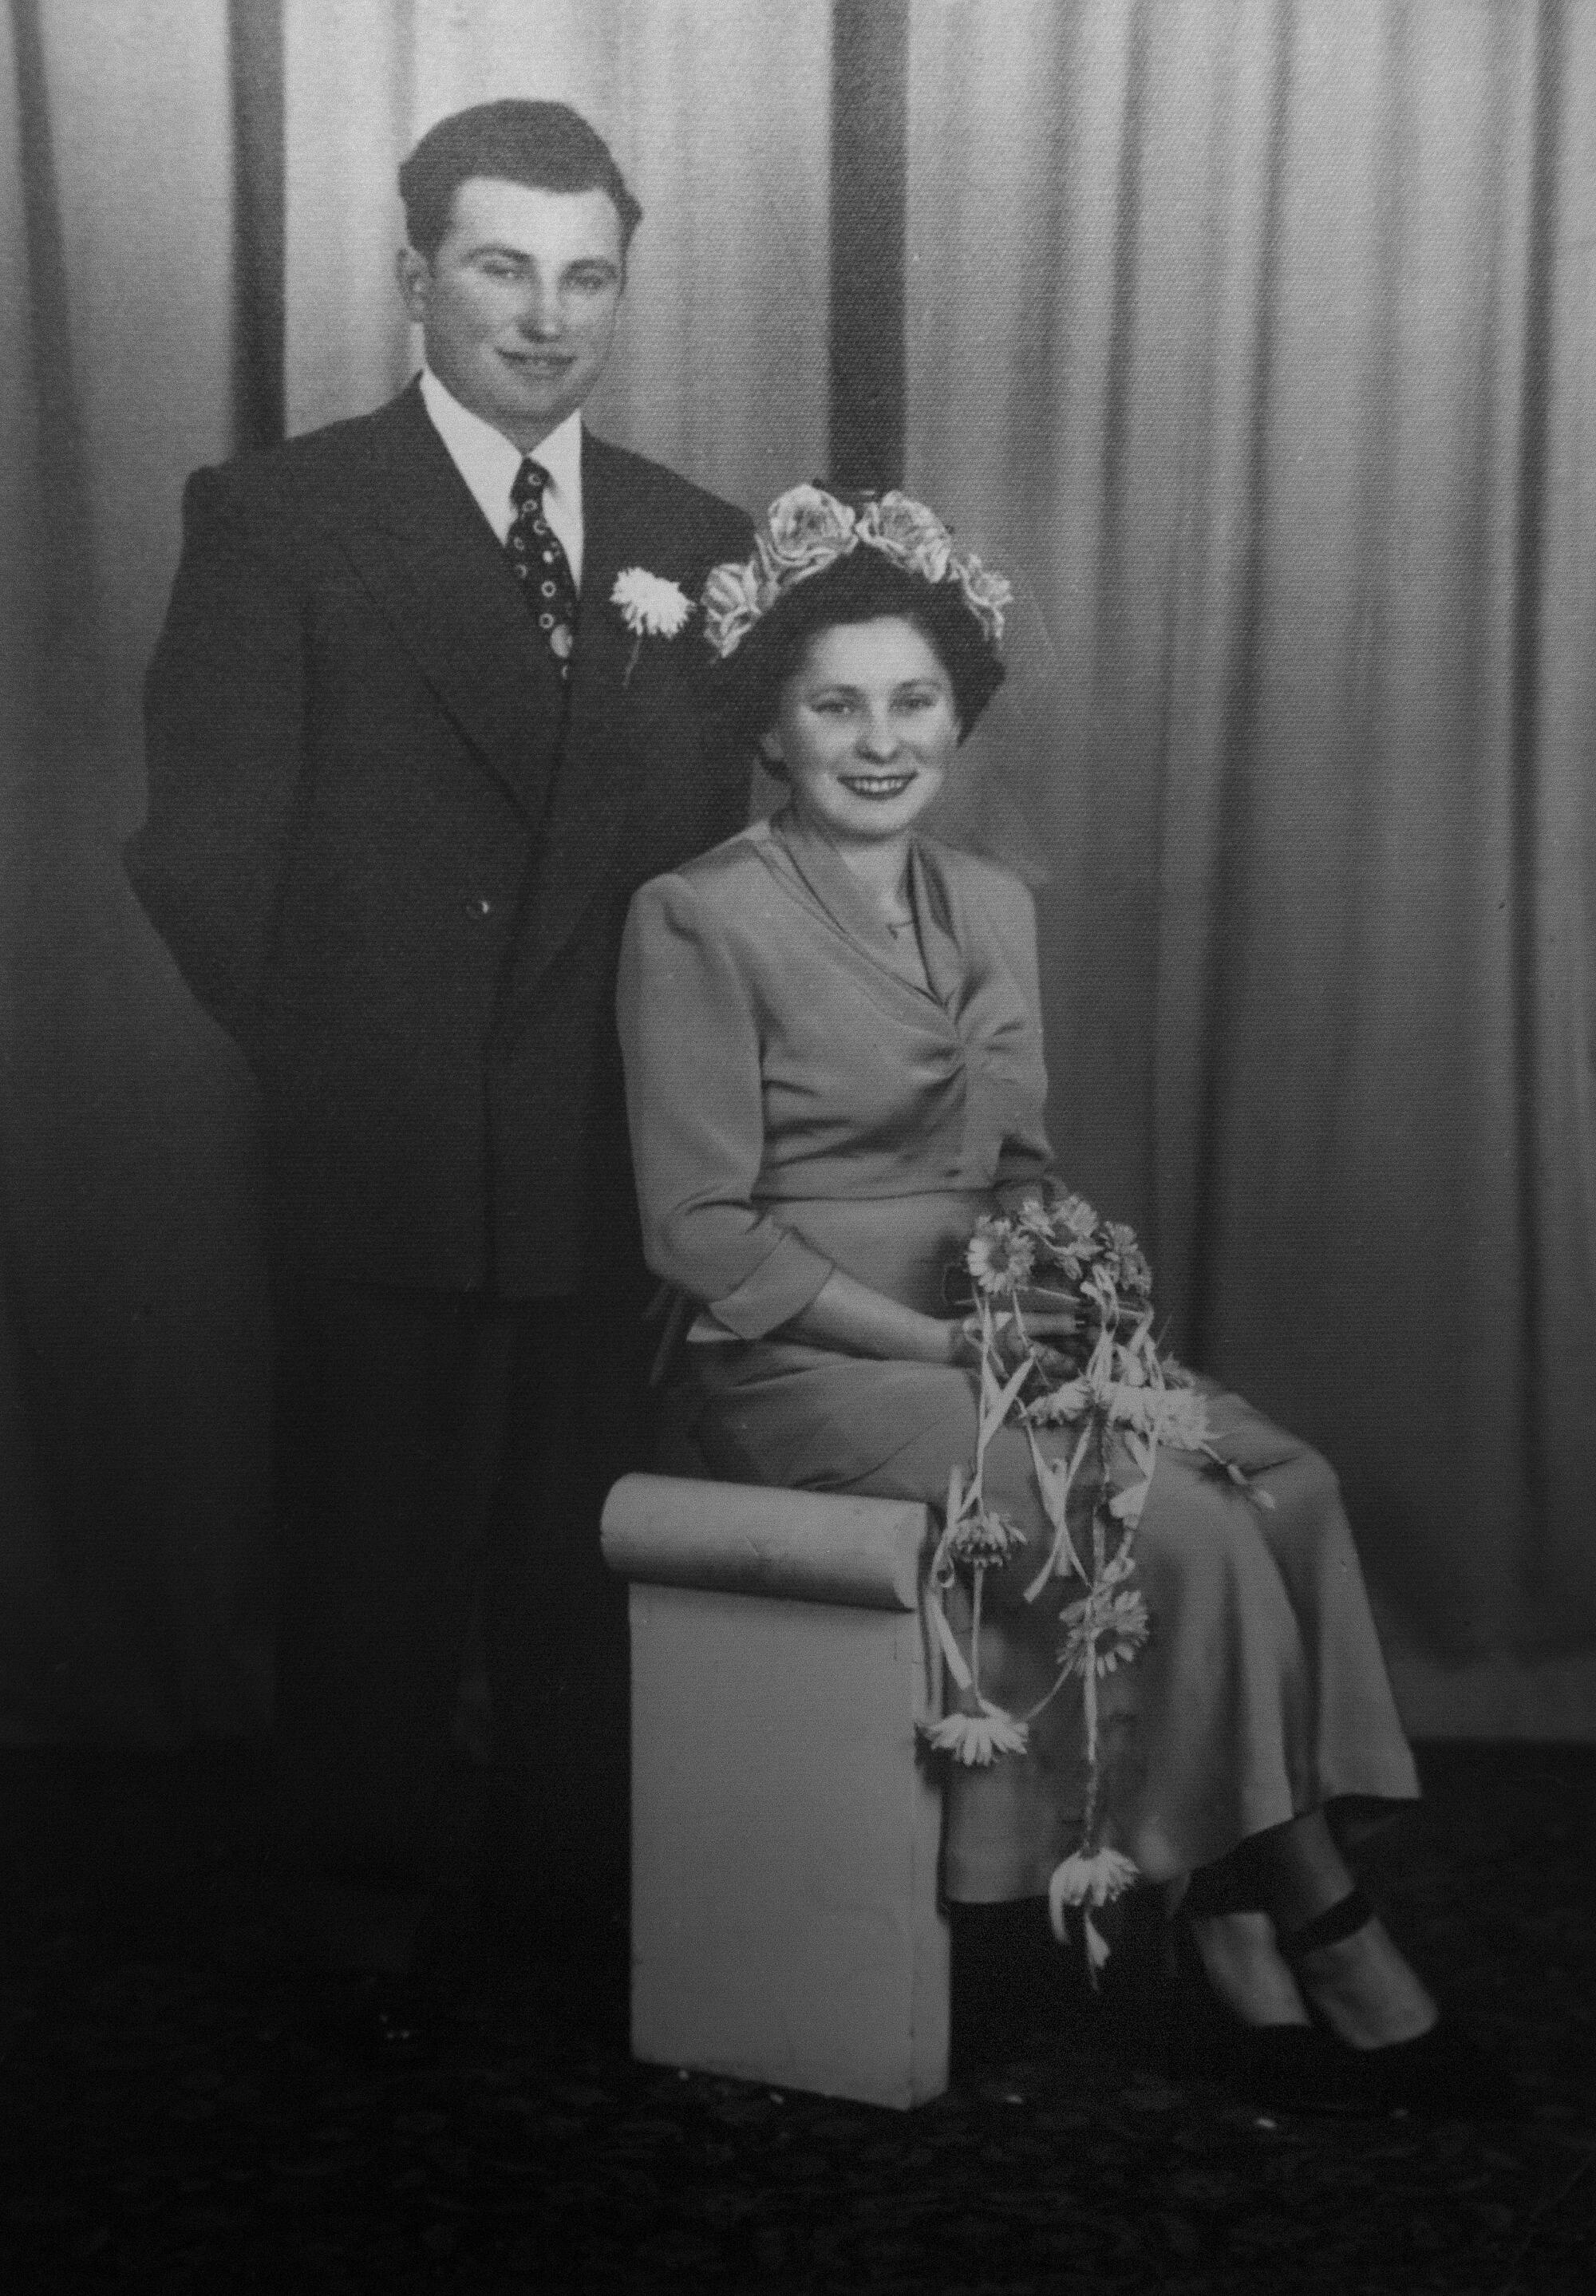 A photo of Hakman and his first wife, Esther, on their wedding day on Dec. 31, 1949, hangs in Hakman's Beverly Hills home.